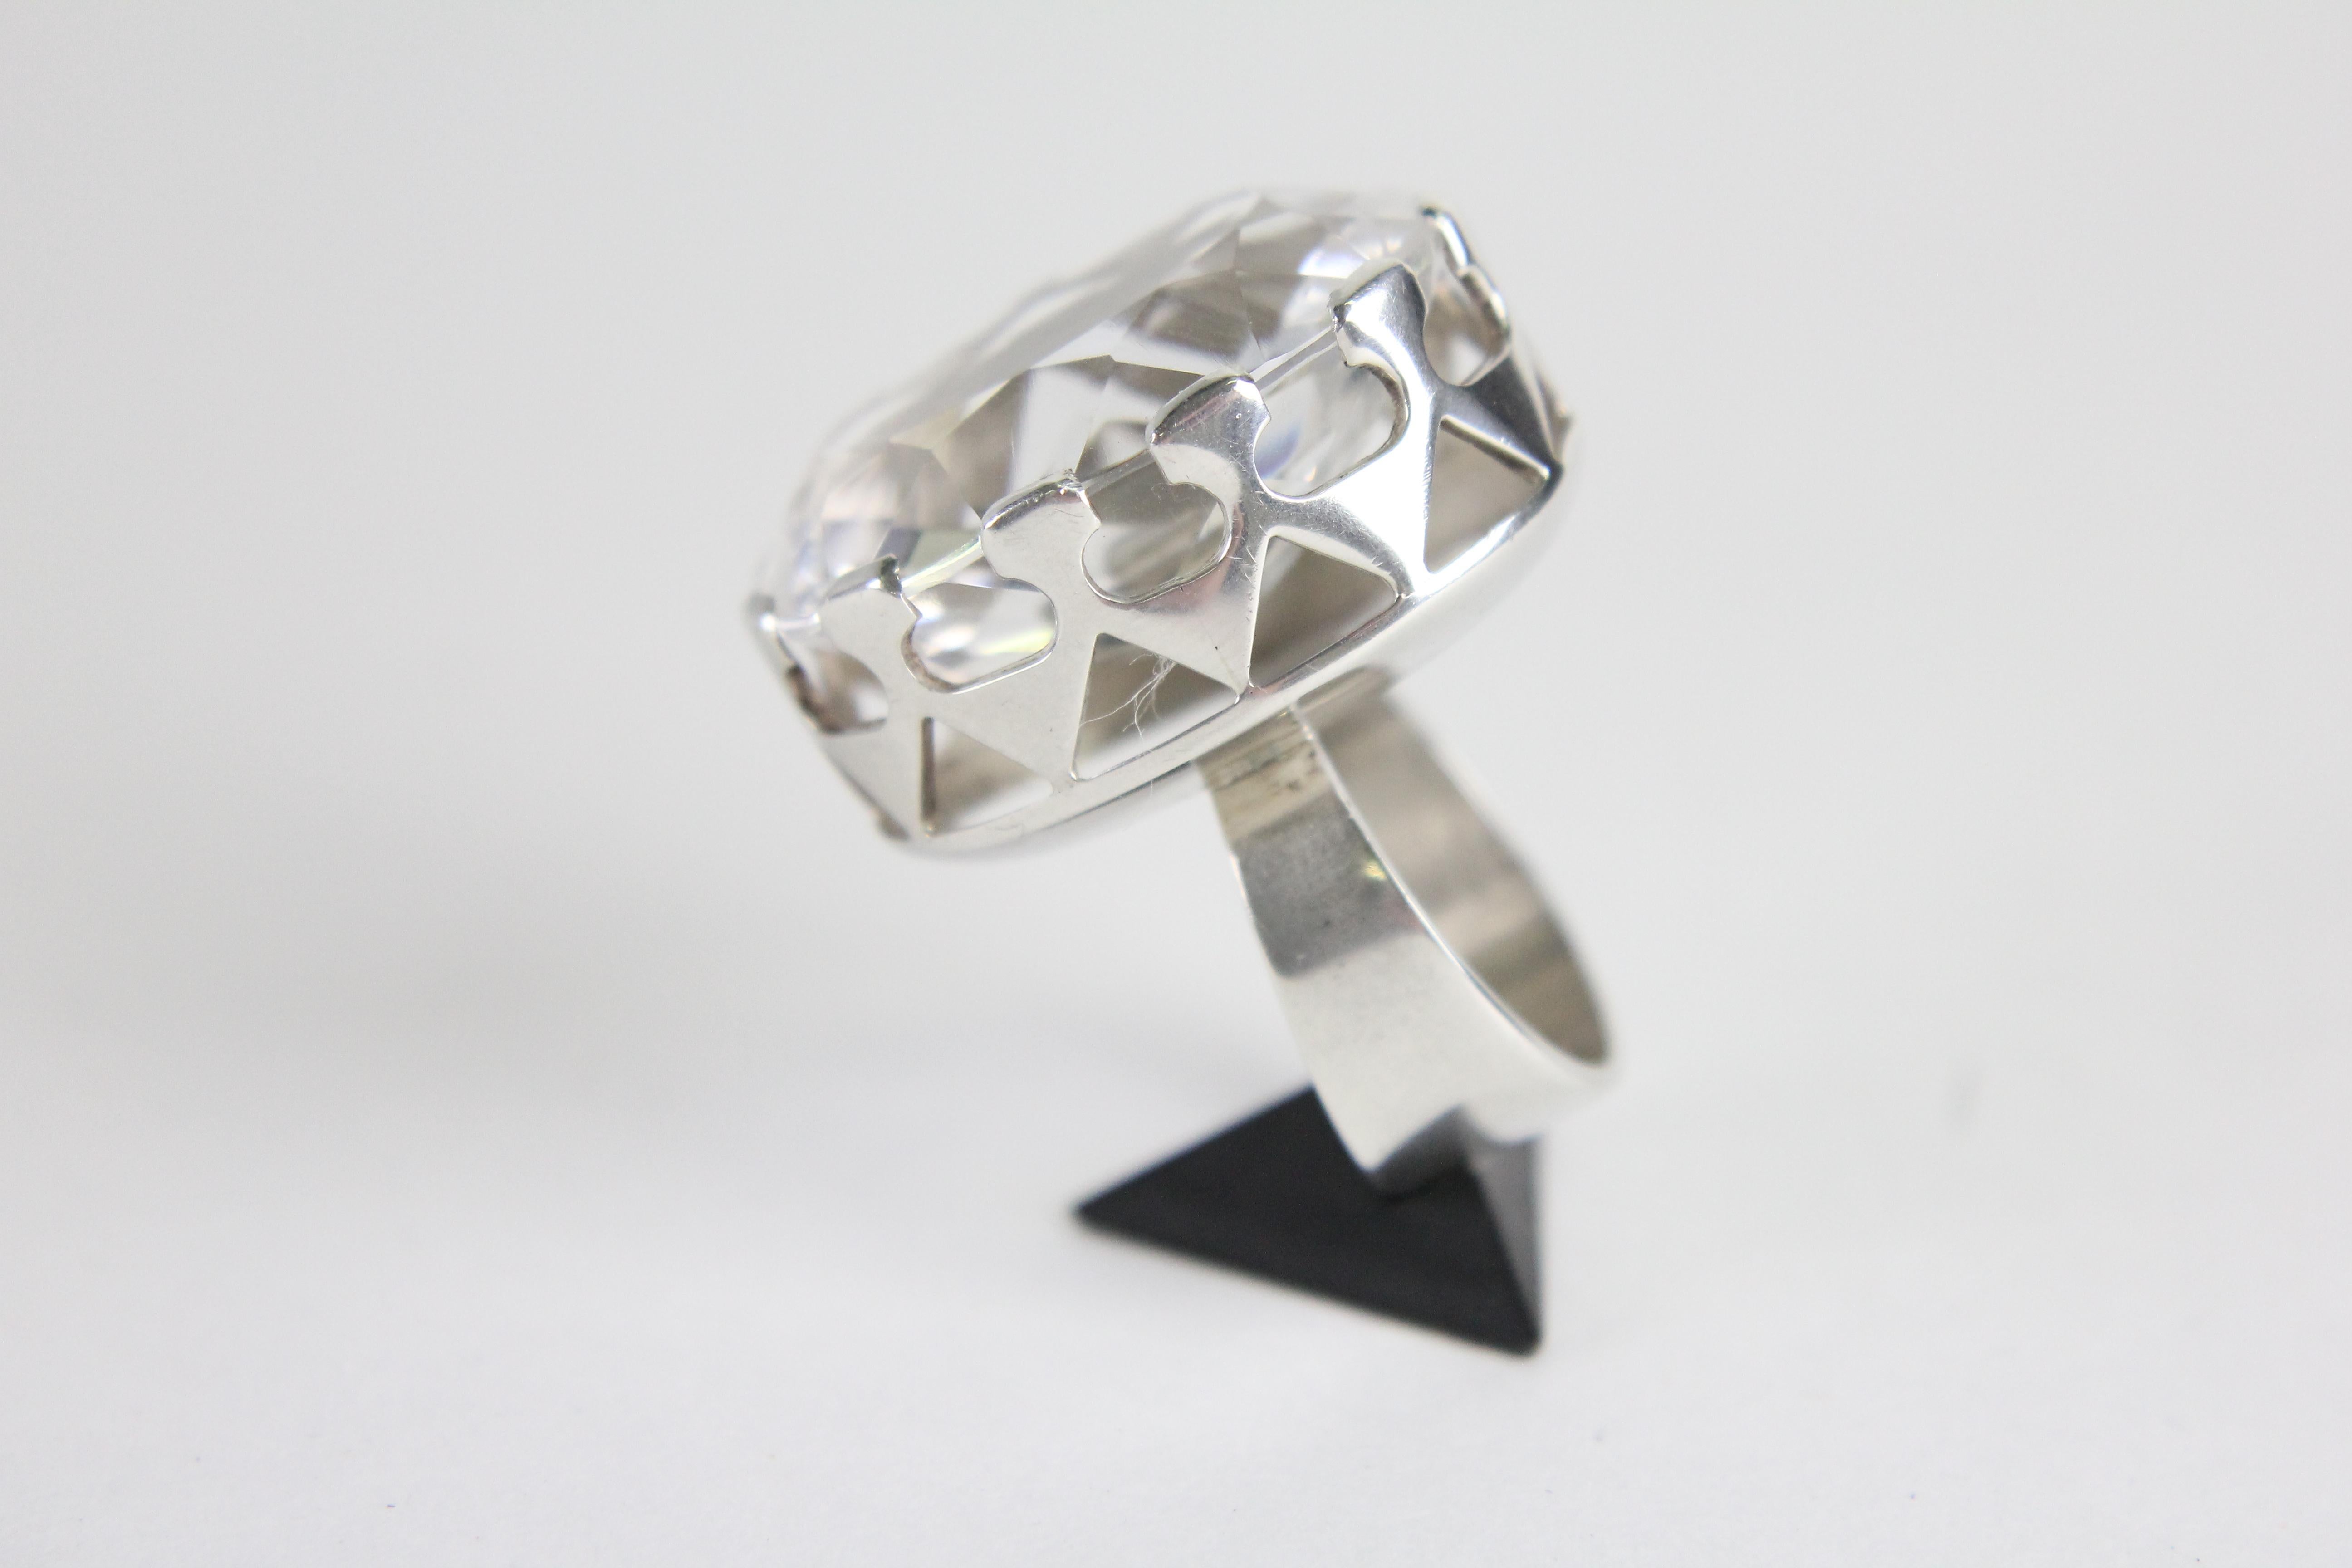 Modernist Ring in Silver and a Large Rock Crystal by Kaplan, Stockholm, 1968 For Sale 7